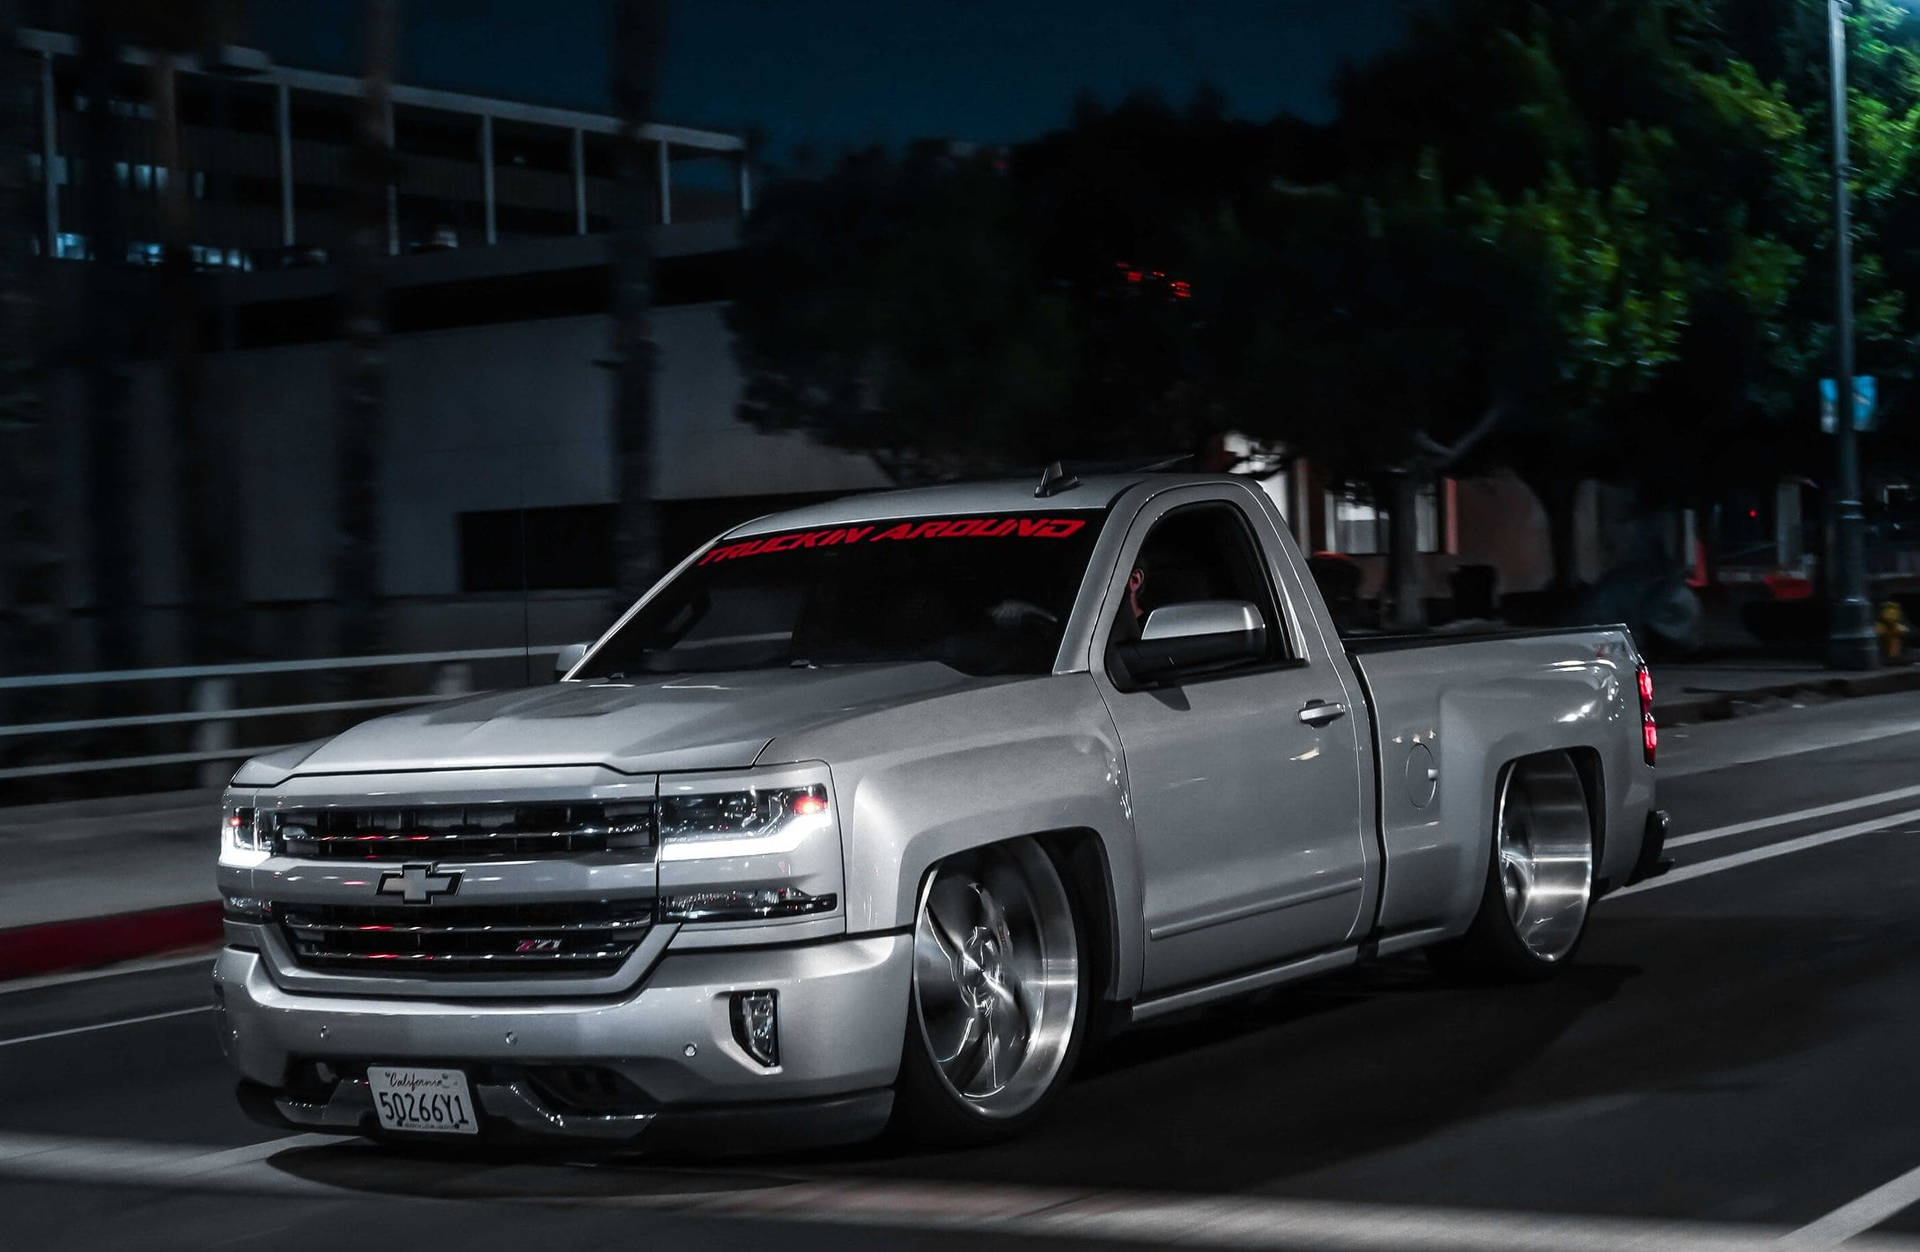 Dropped Truck At Night